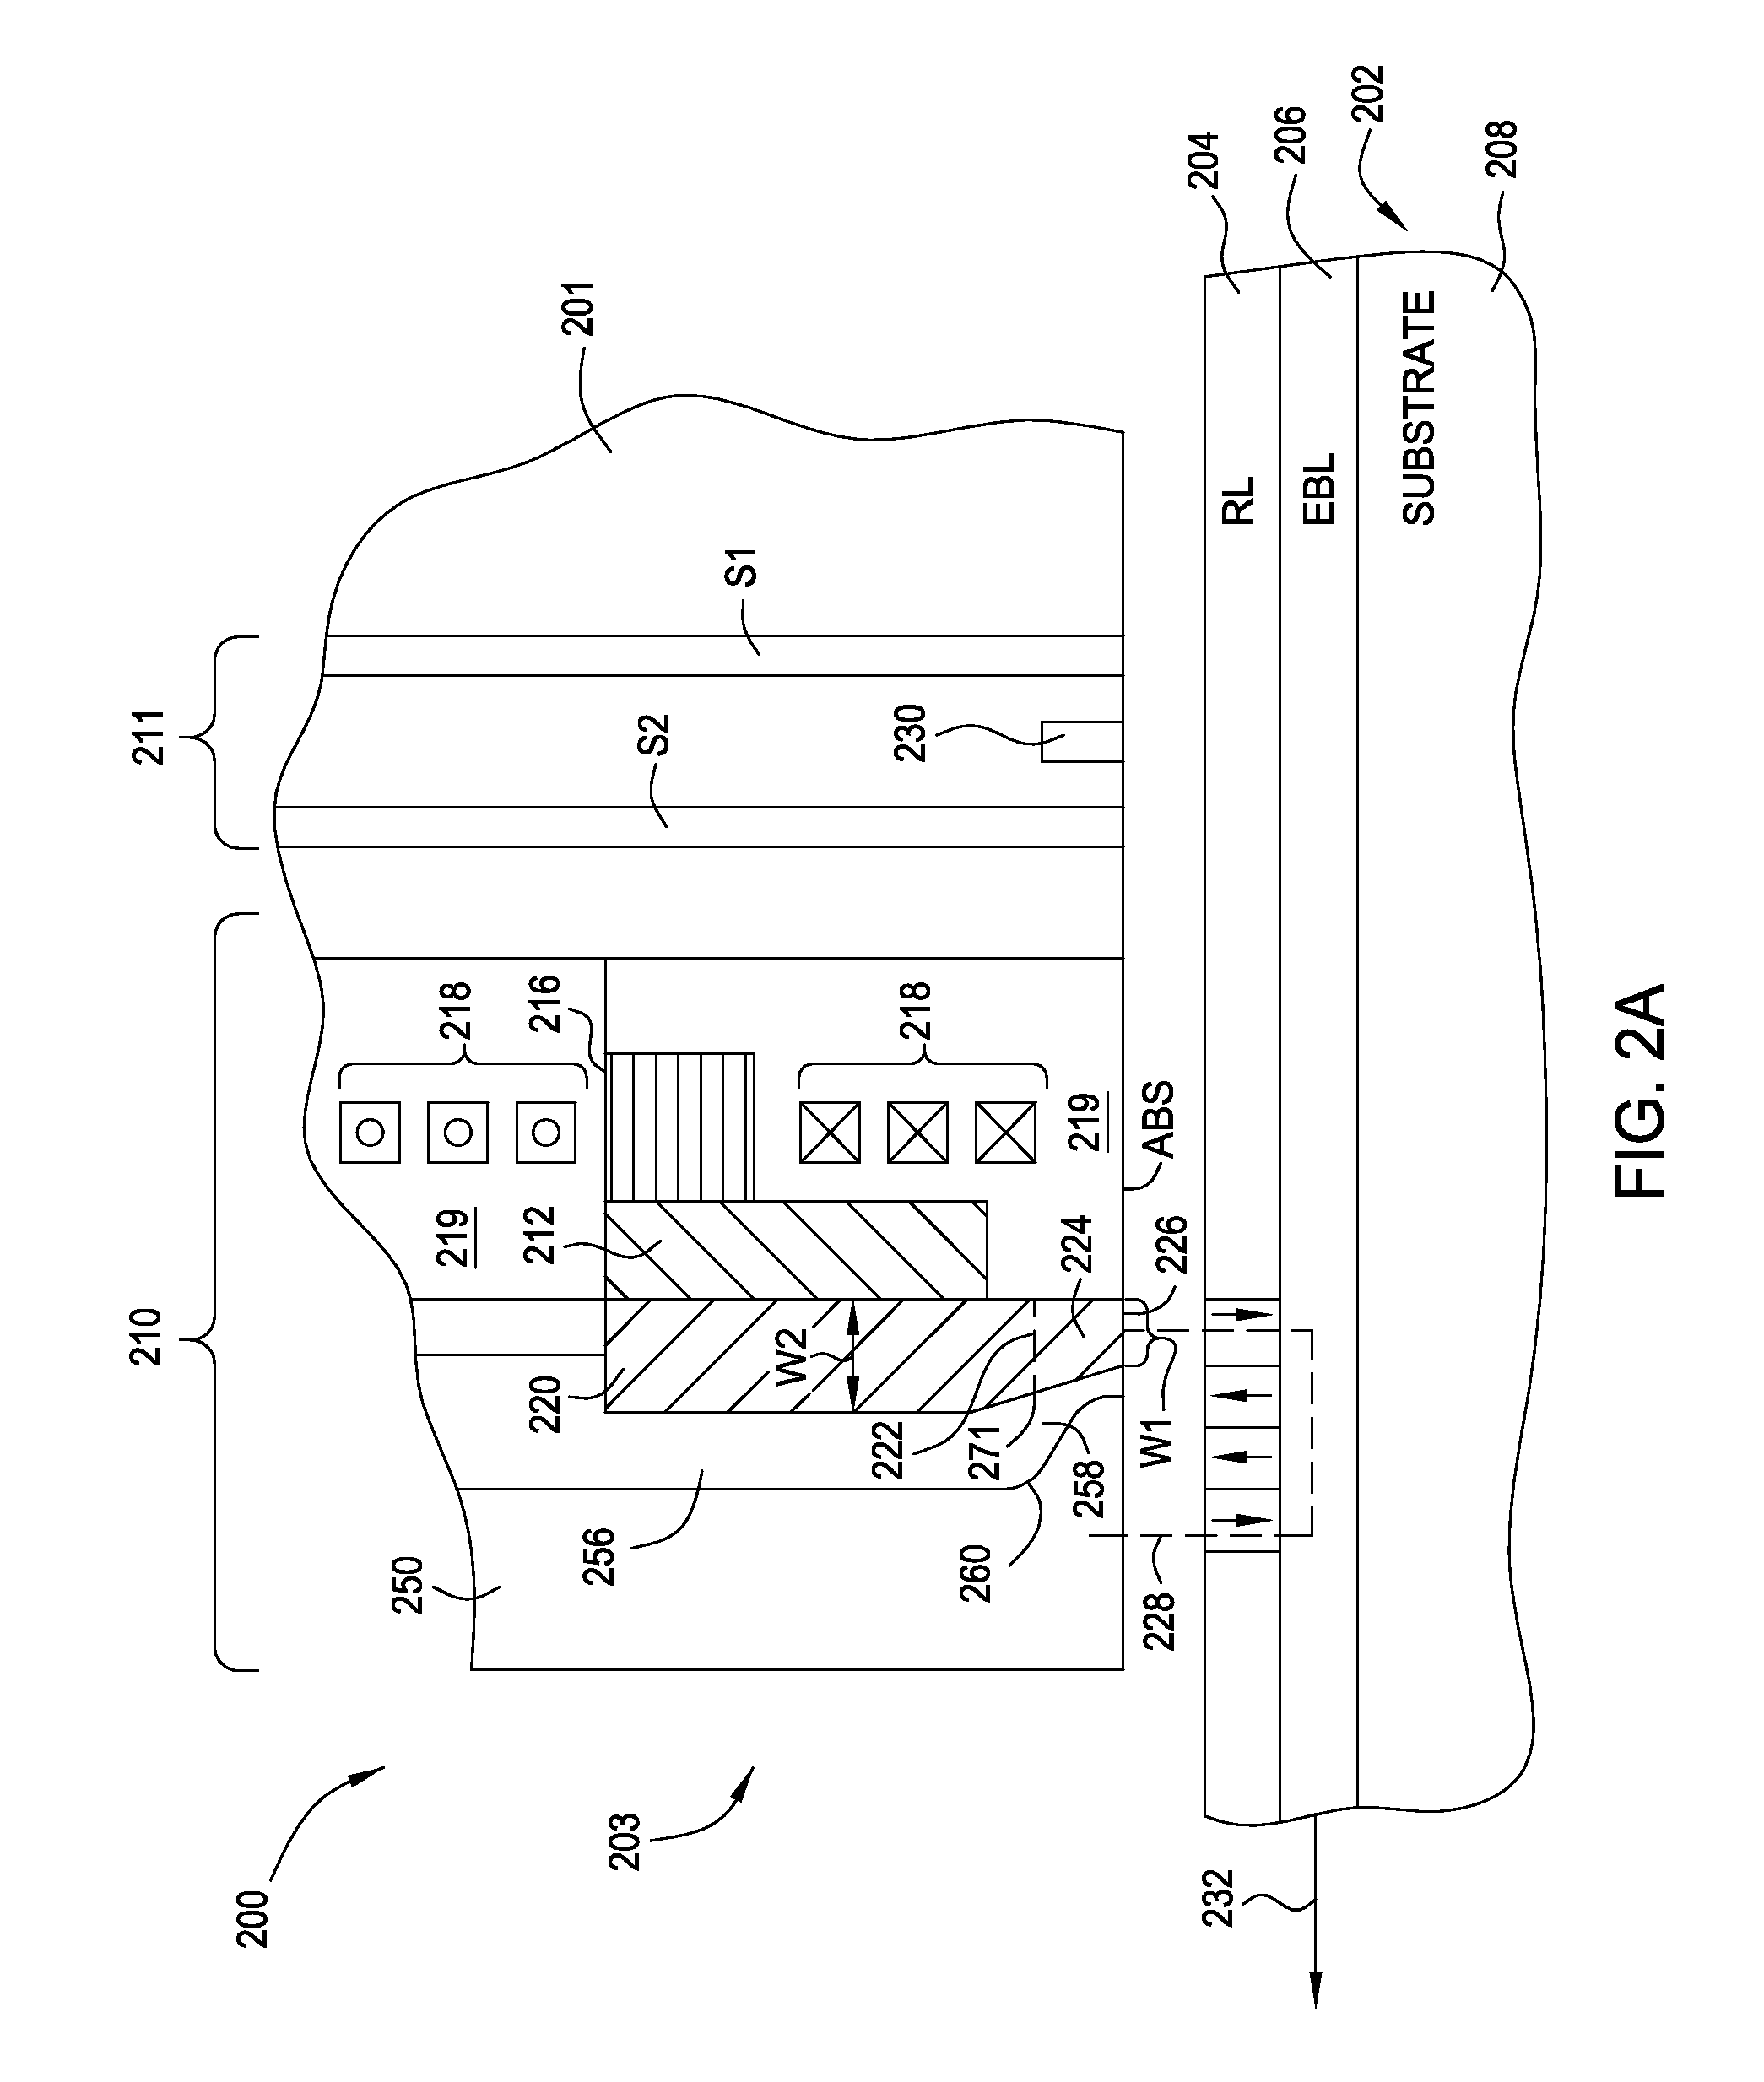 Pmr writer and method of fabrication